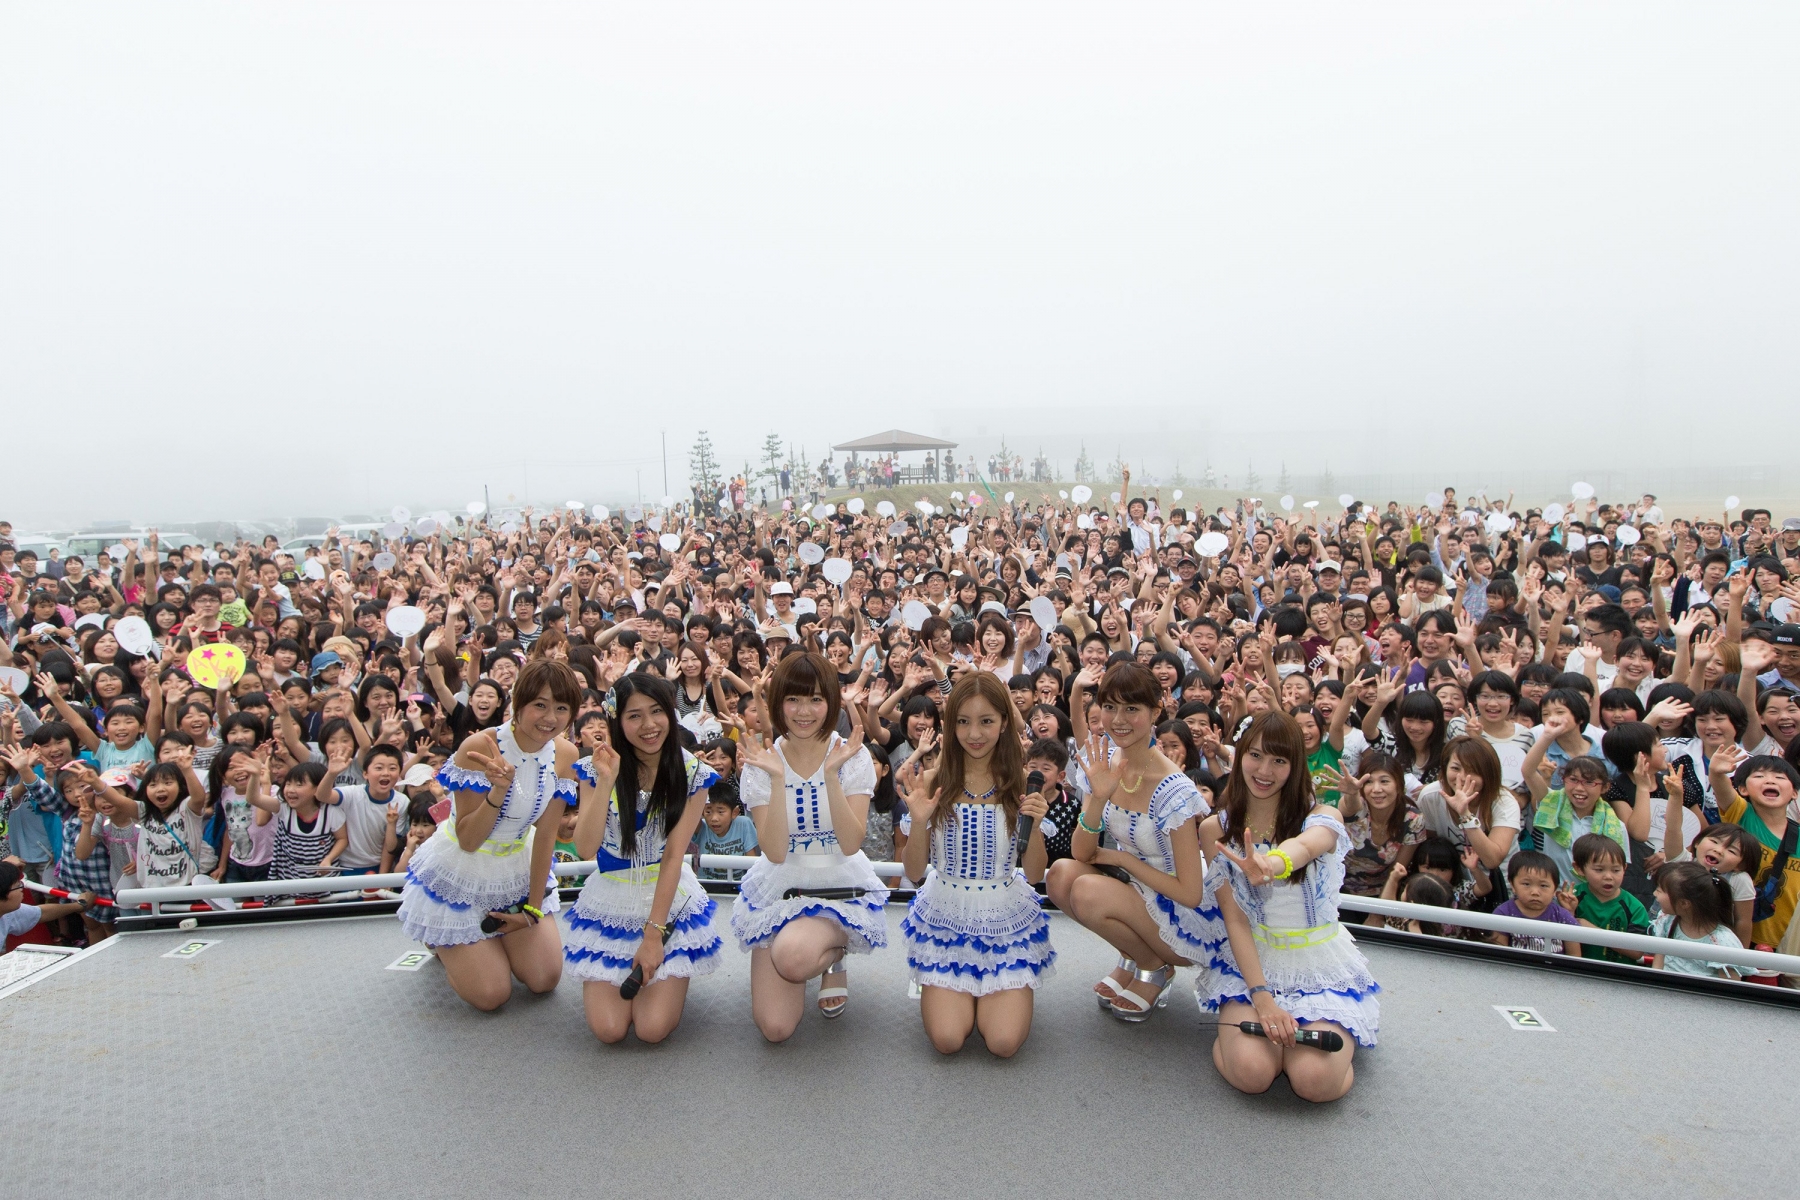 AKB48 Group Performs on 3.11 to Support Tohoku Earthquake Restoration and Participates in “Dareka No Tameni – What can I do for someone?” Project